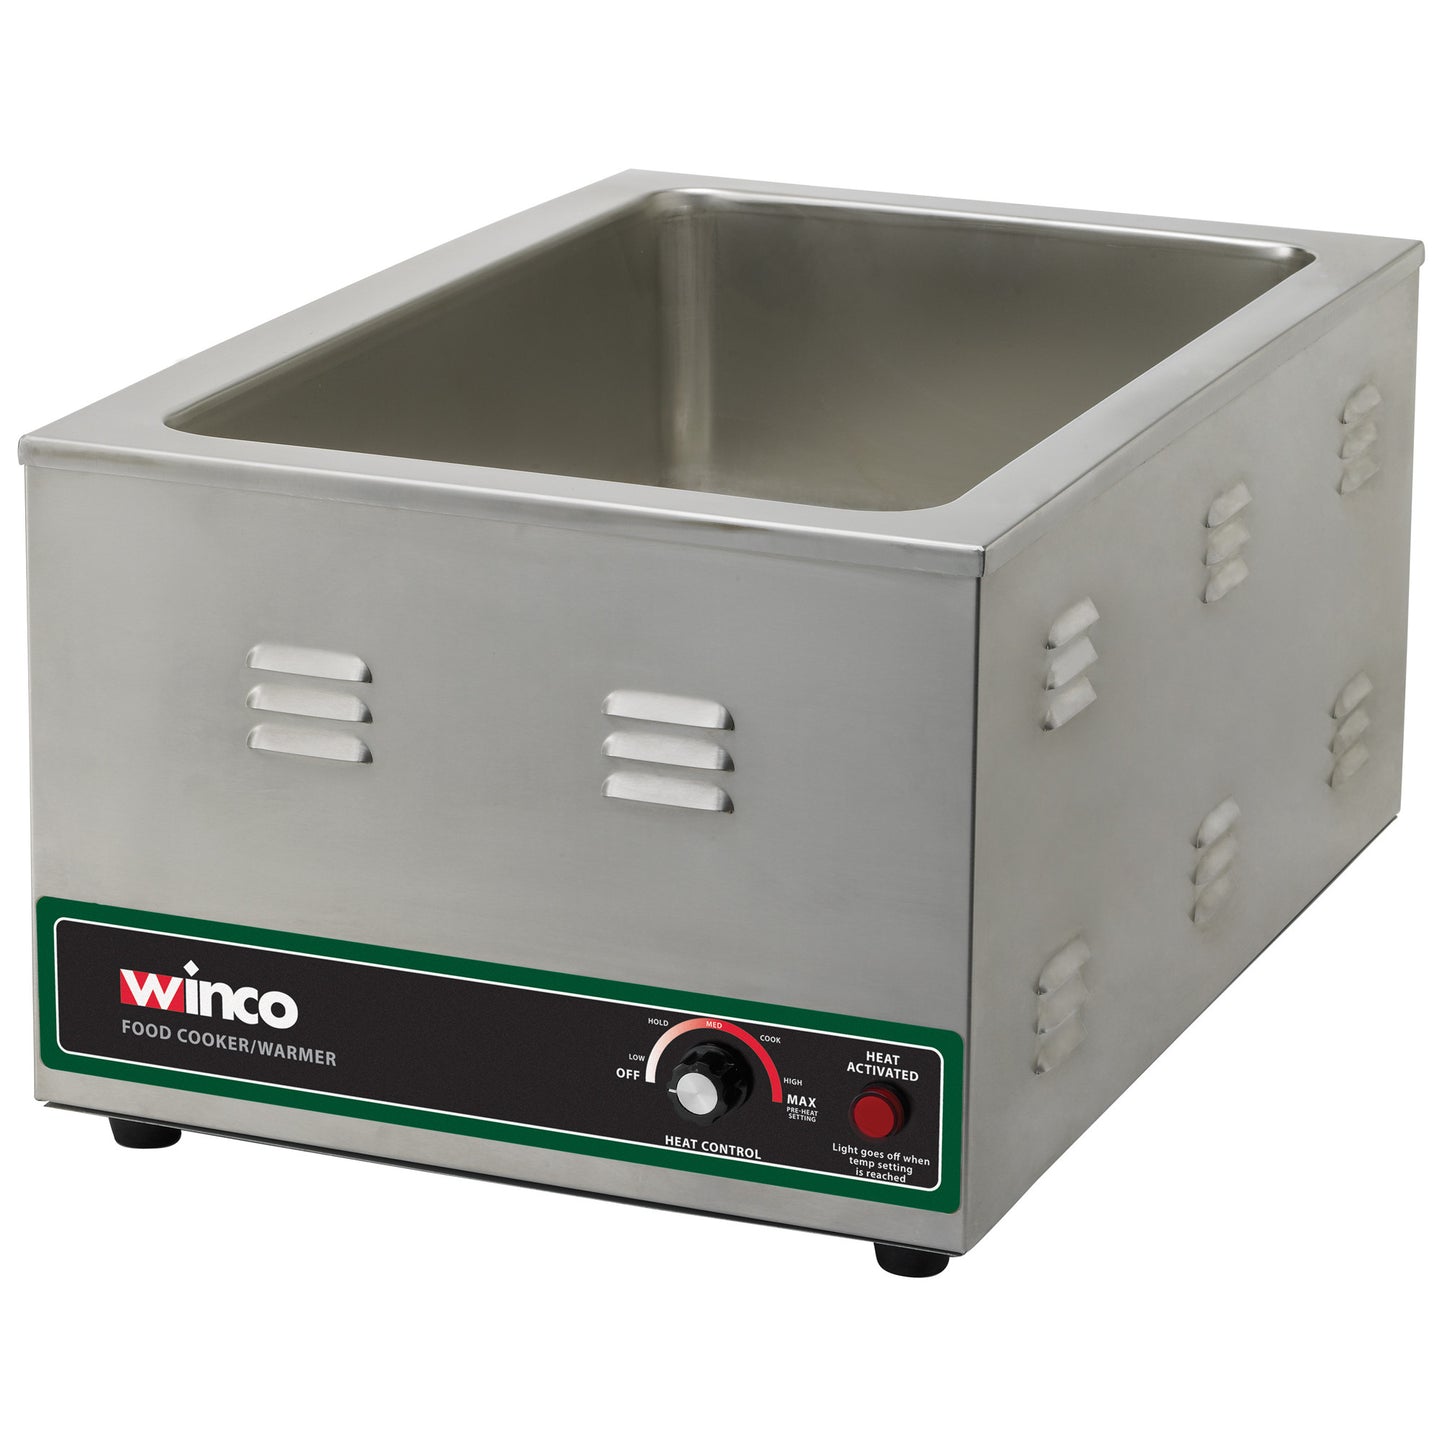 FW-S600 - Electric Food Cooker/Warmer, 1500W